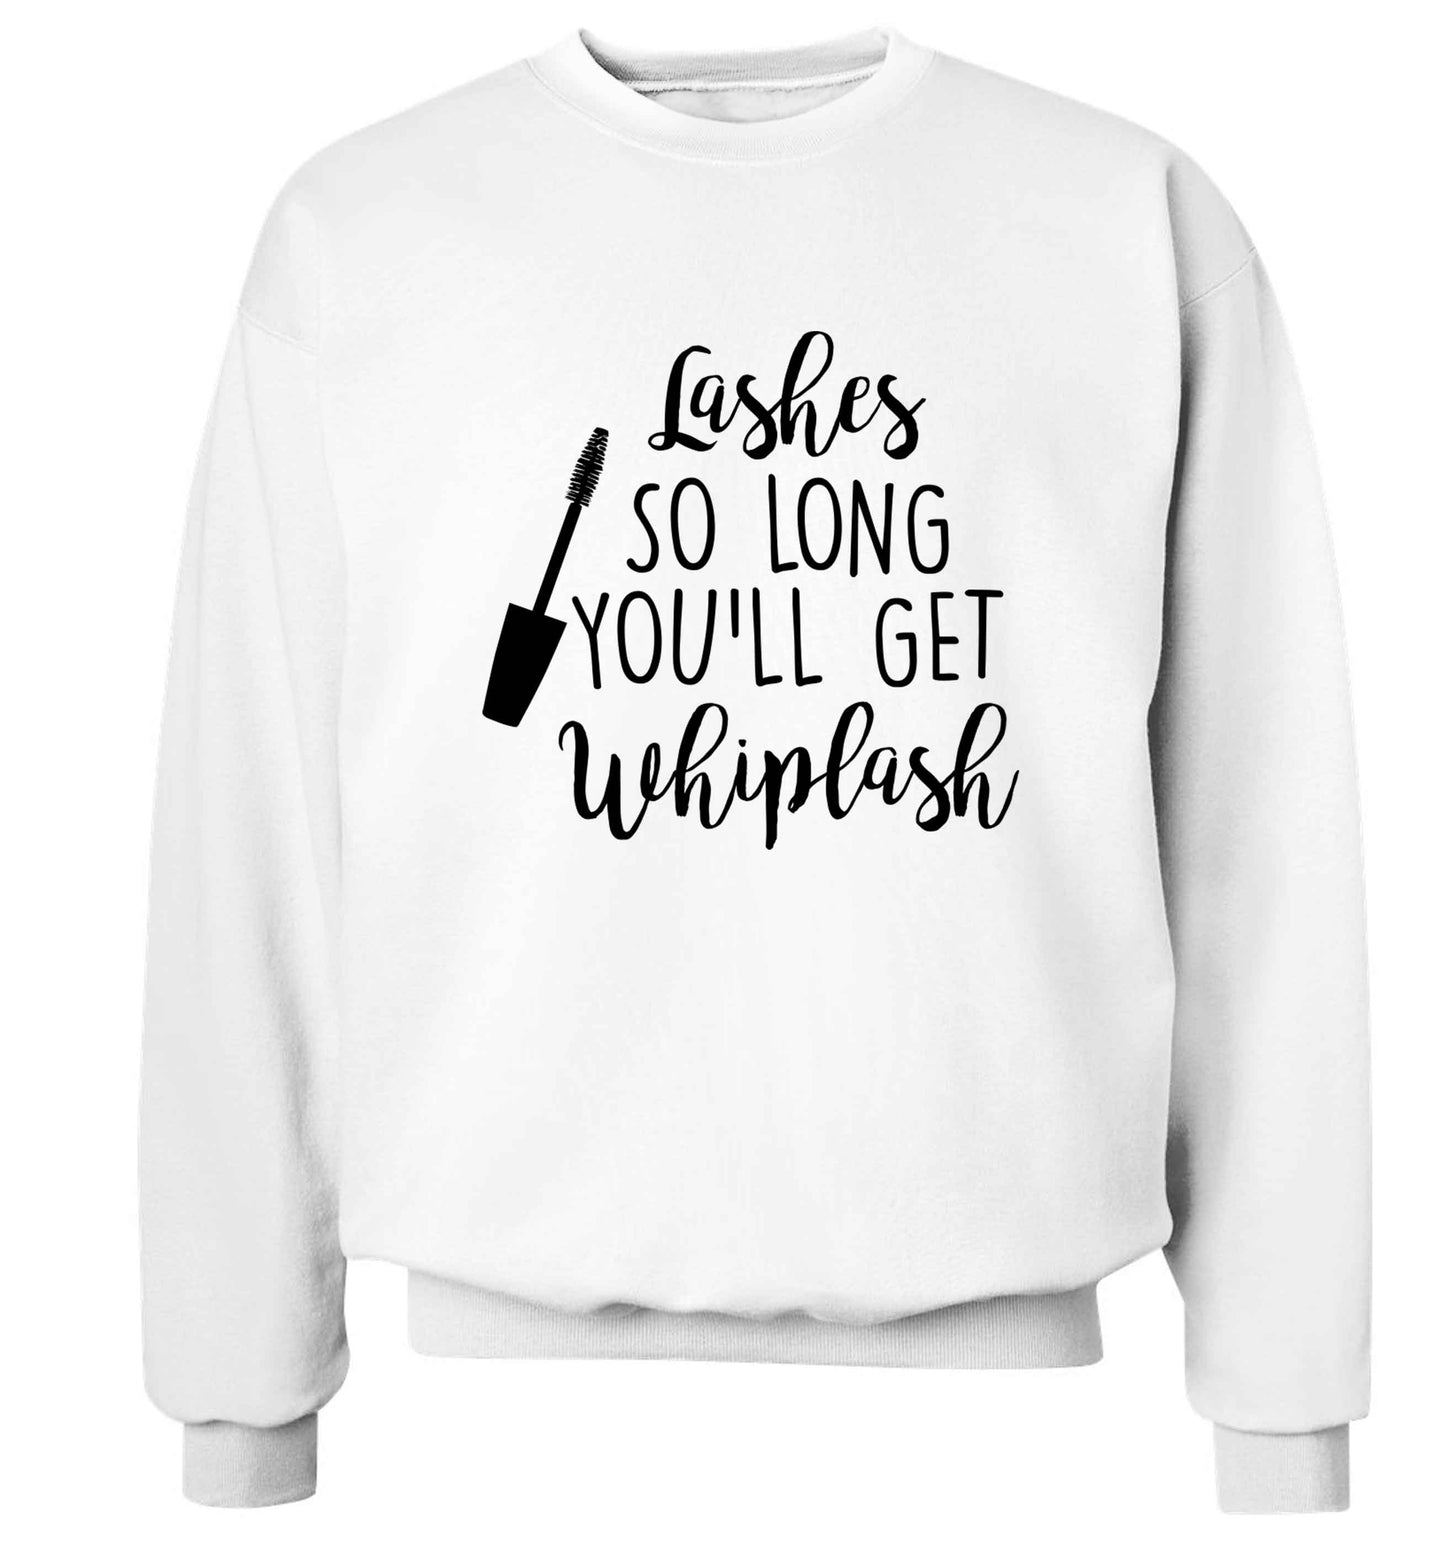 Lashes so long you'll get whiplash Adult's unisex white Sweater 2XL